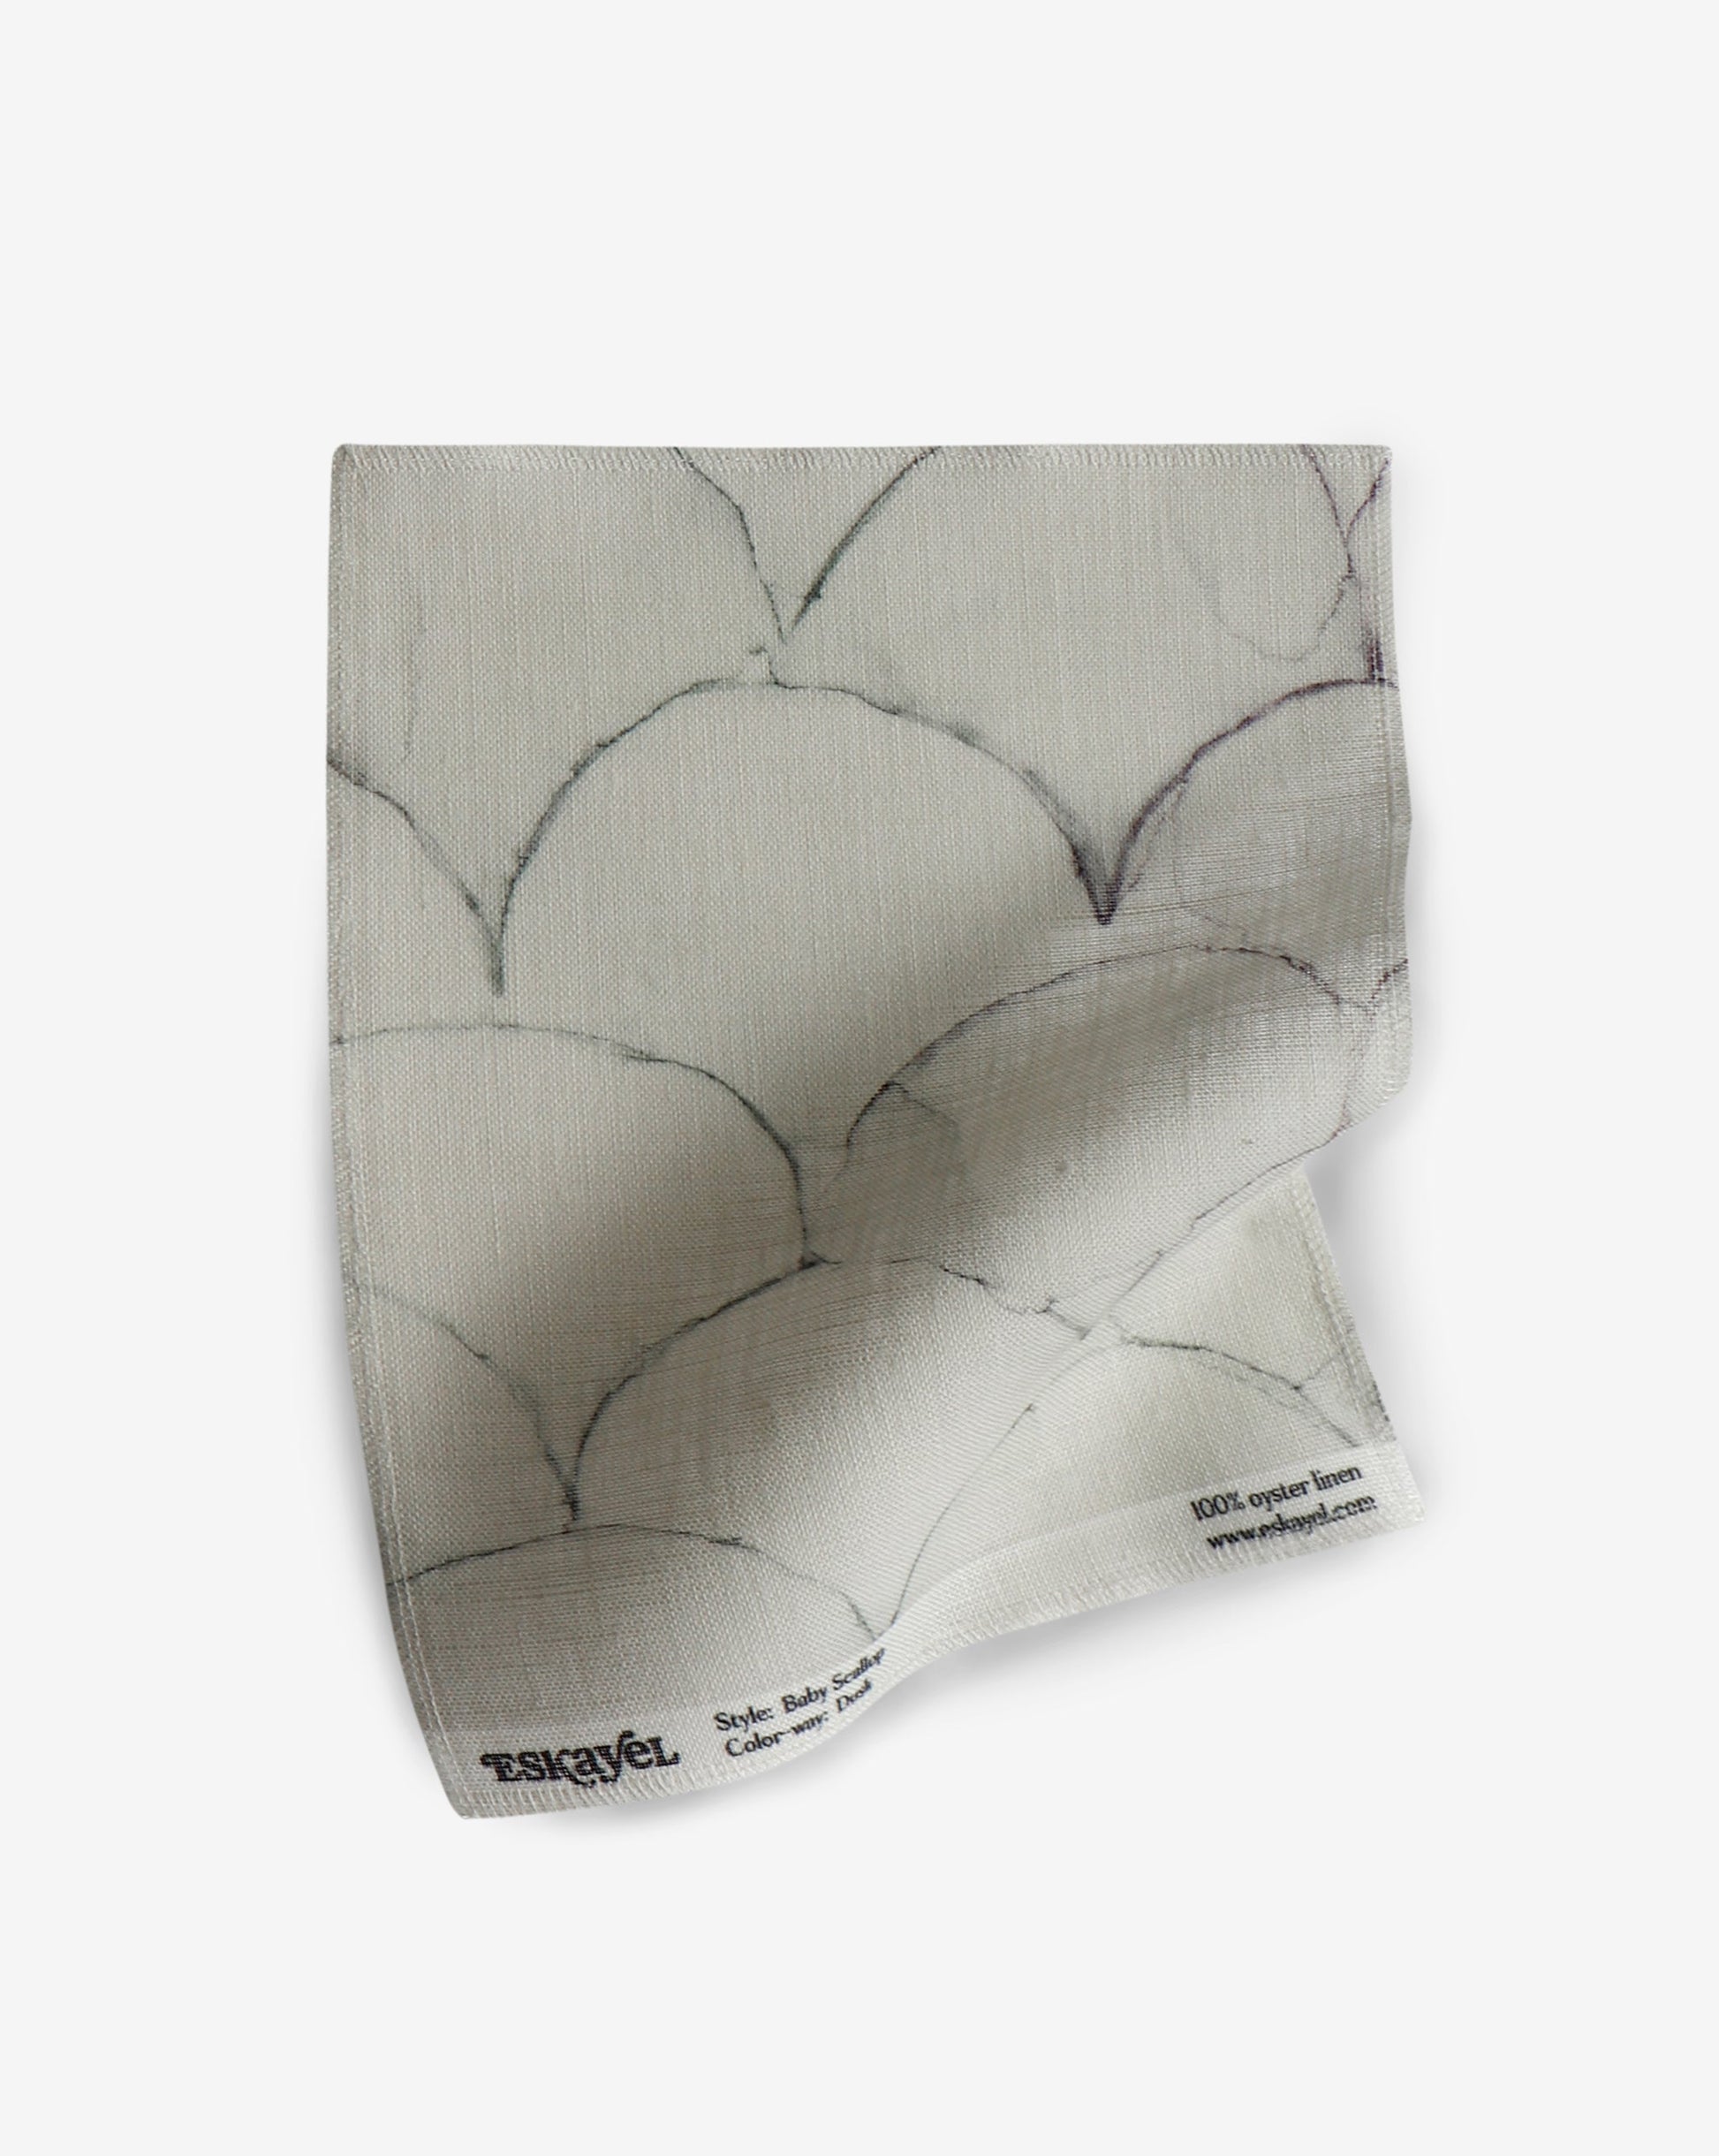 A Baby Scallop Fabric Sample Dusk with a black and white pattern is available for order